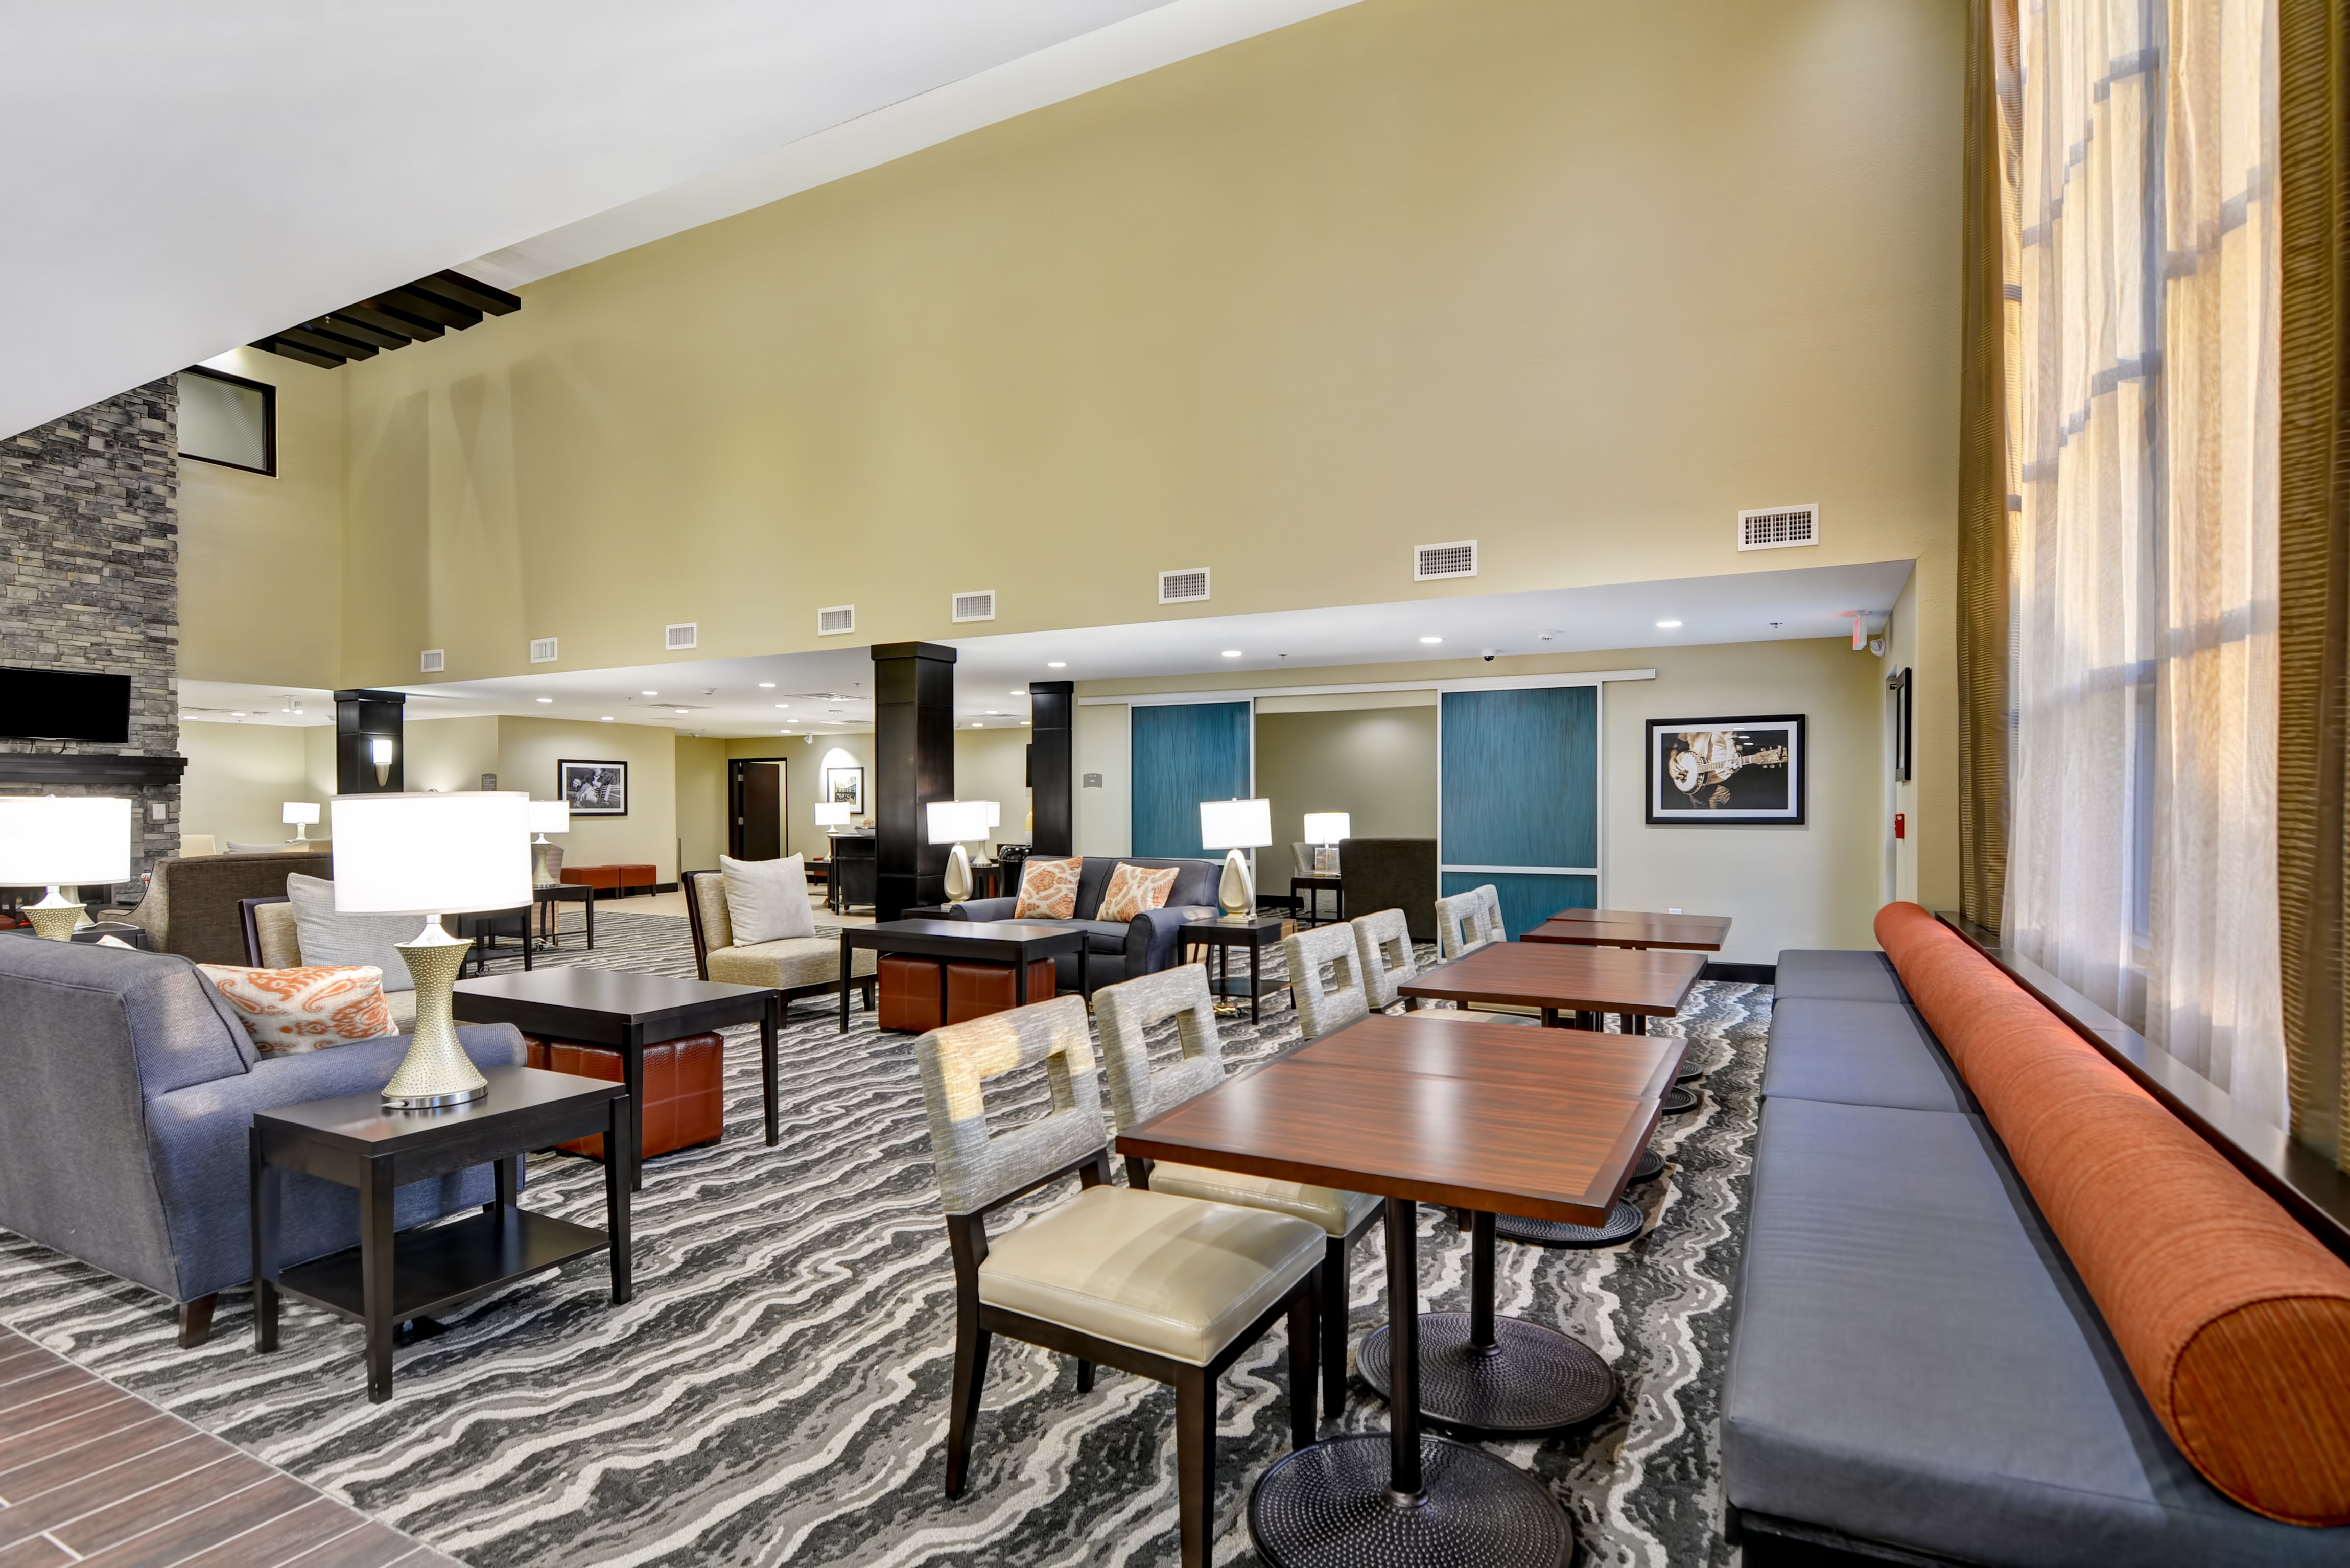 Welcome to your workweek or weekend stay in Mount Juliet.